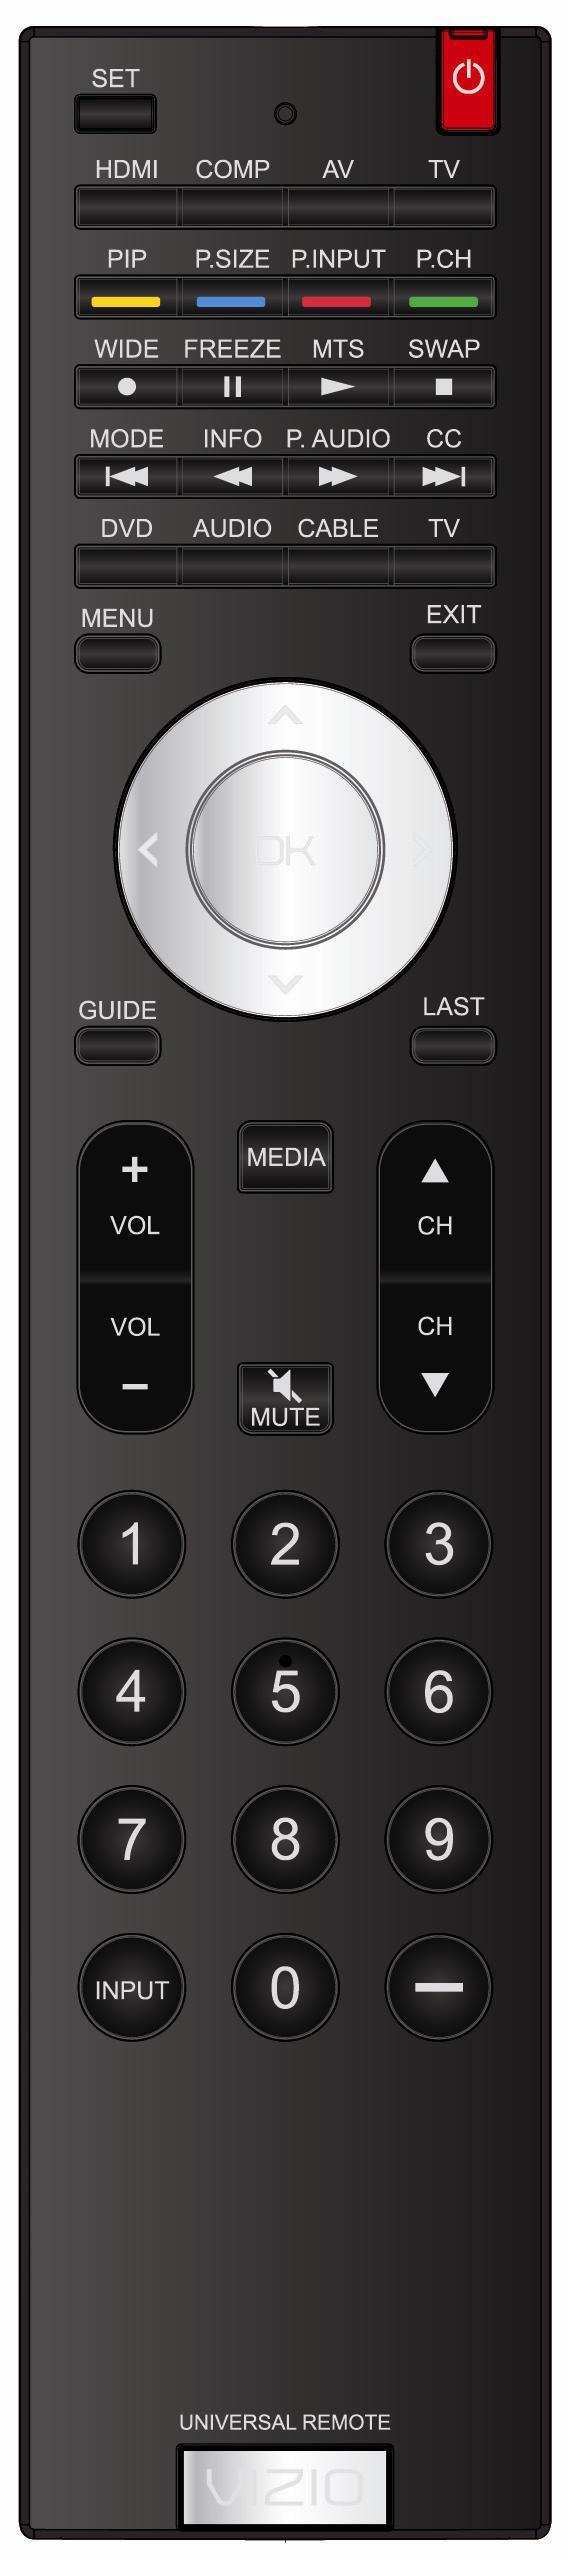 VIZIO Remote Control POWER ( ) Press this button to turn the TV on from the Standby mode. Press it again to return to the Standby mode. SET This button starts all programming of the Remote Control.